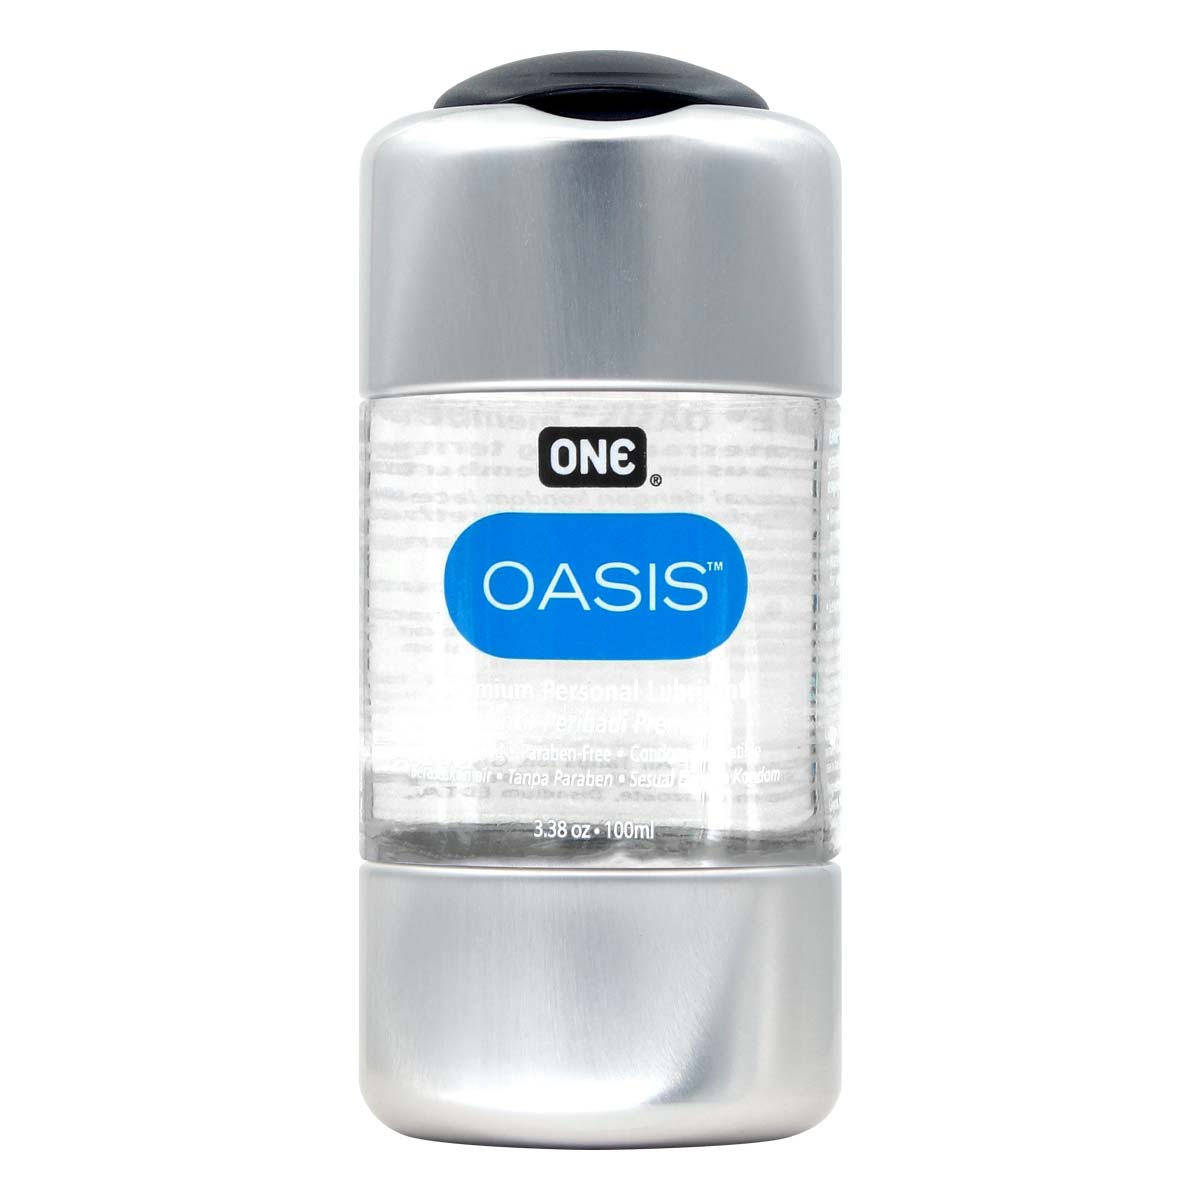 ONE Oasis 100ml Water-based Lubricant-p_2